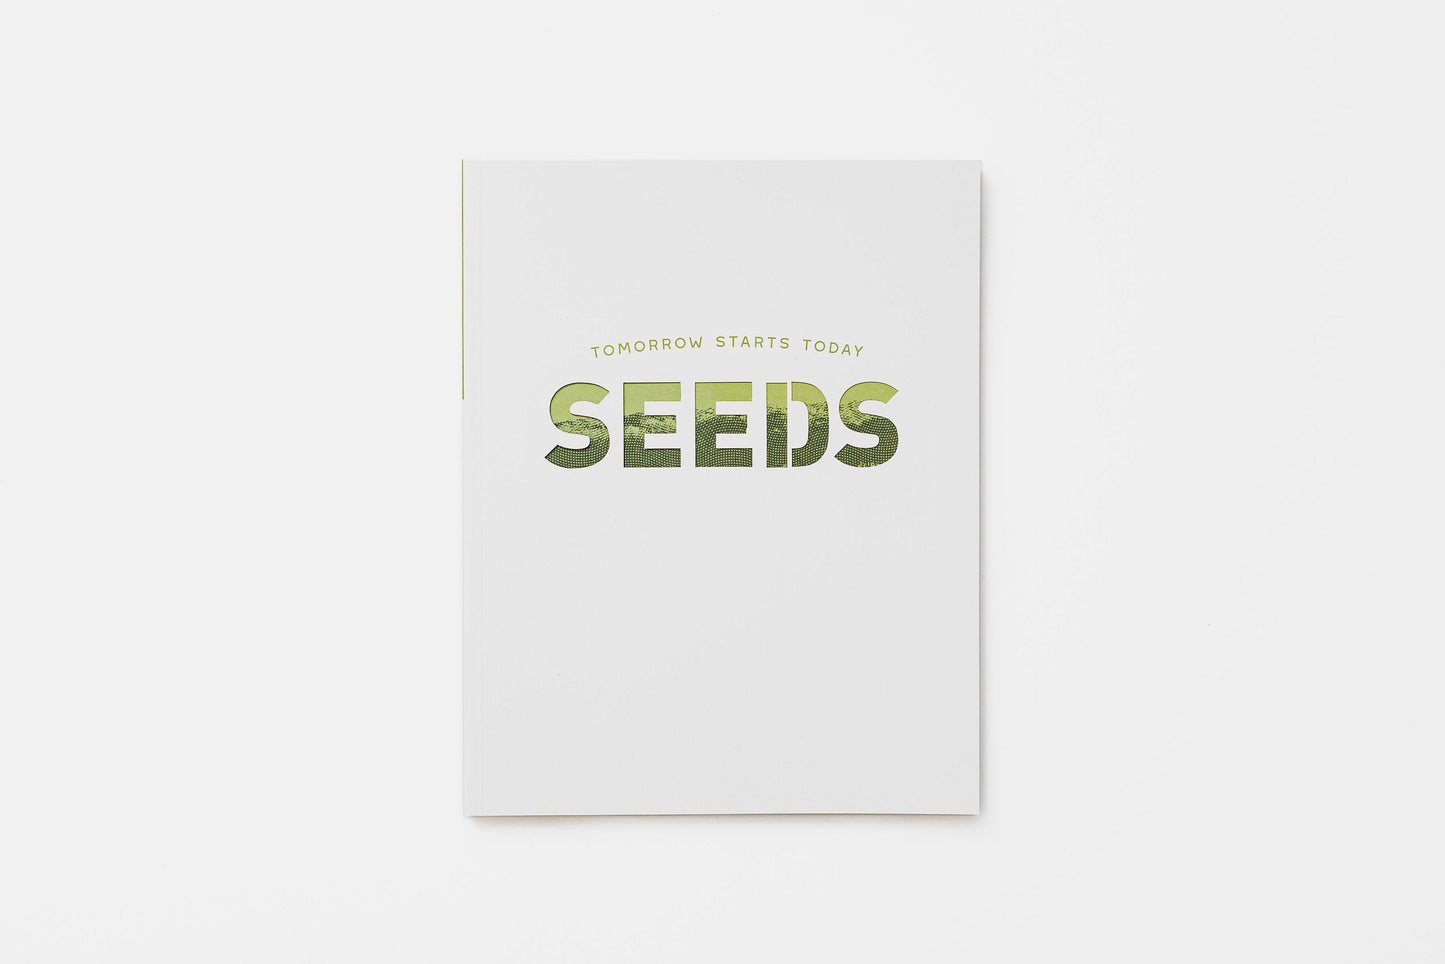 Seeds Study Guide